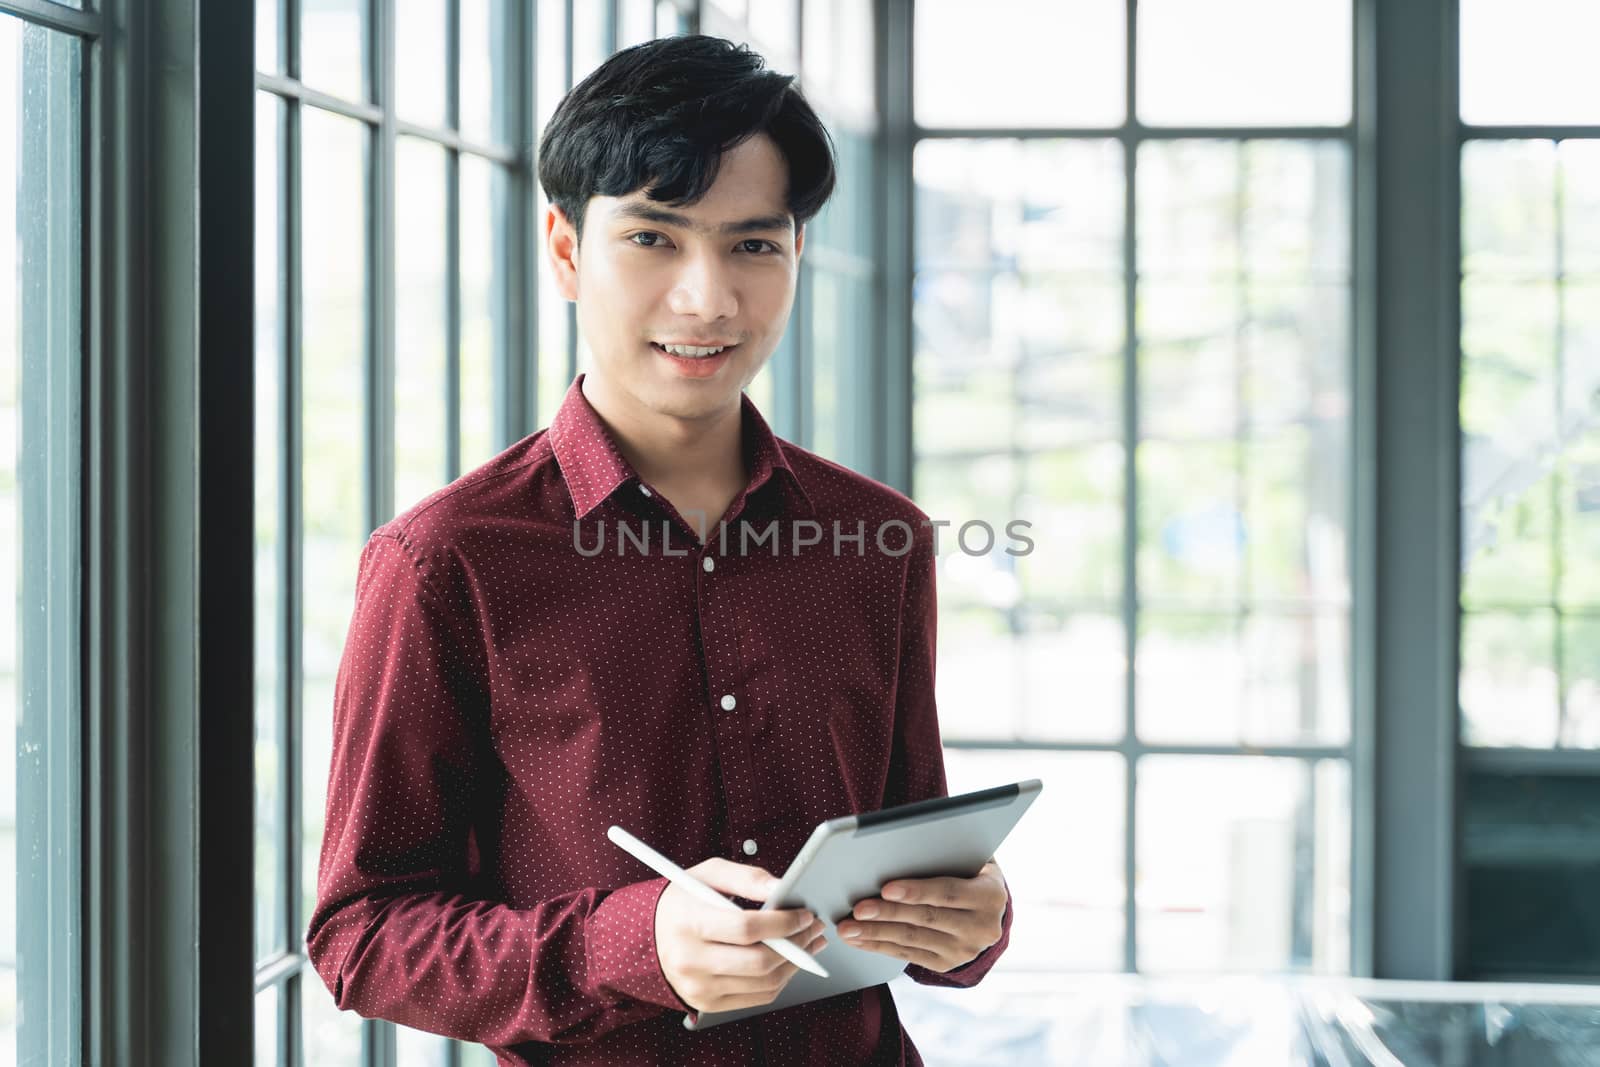 Men are smiling and cheerful. Using the tablet and holding it on hand. He use tablet to work, check emails, teleconferences, or social networks. During work from home at the Home Office